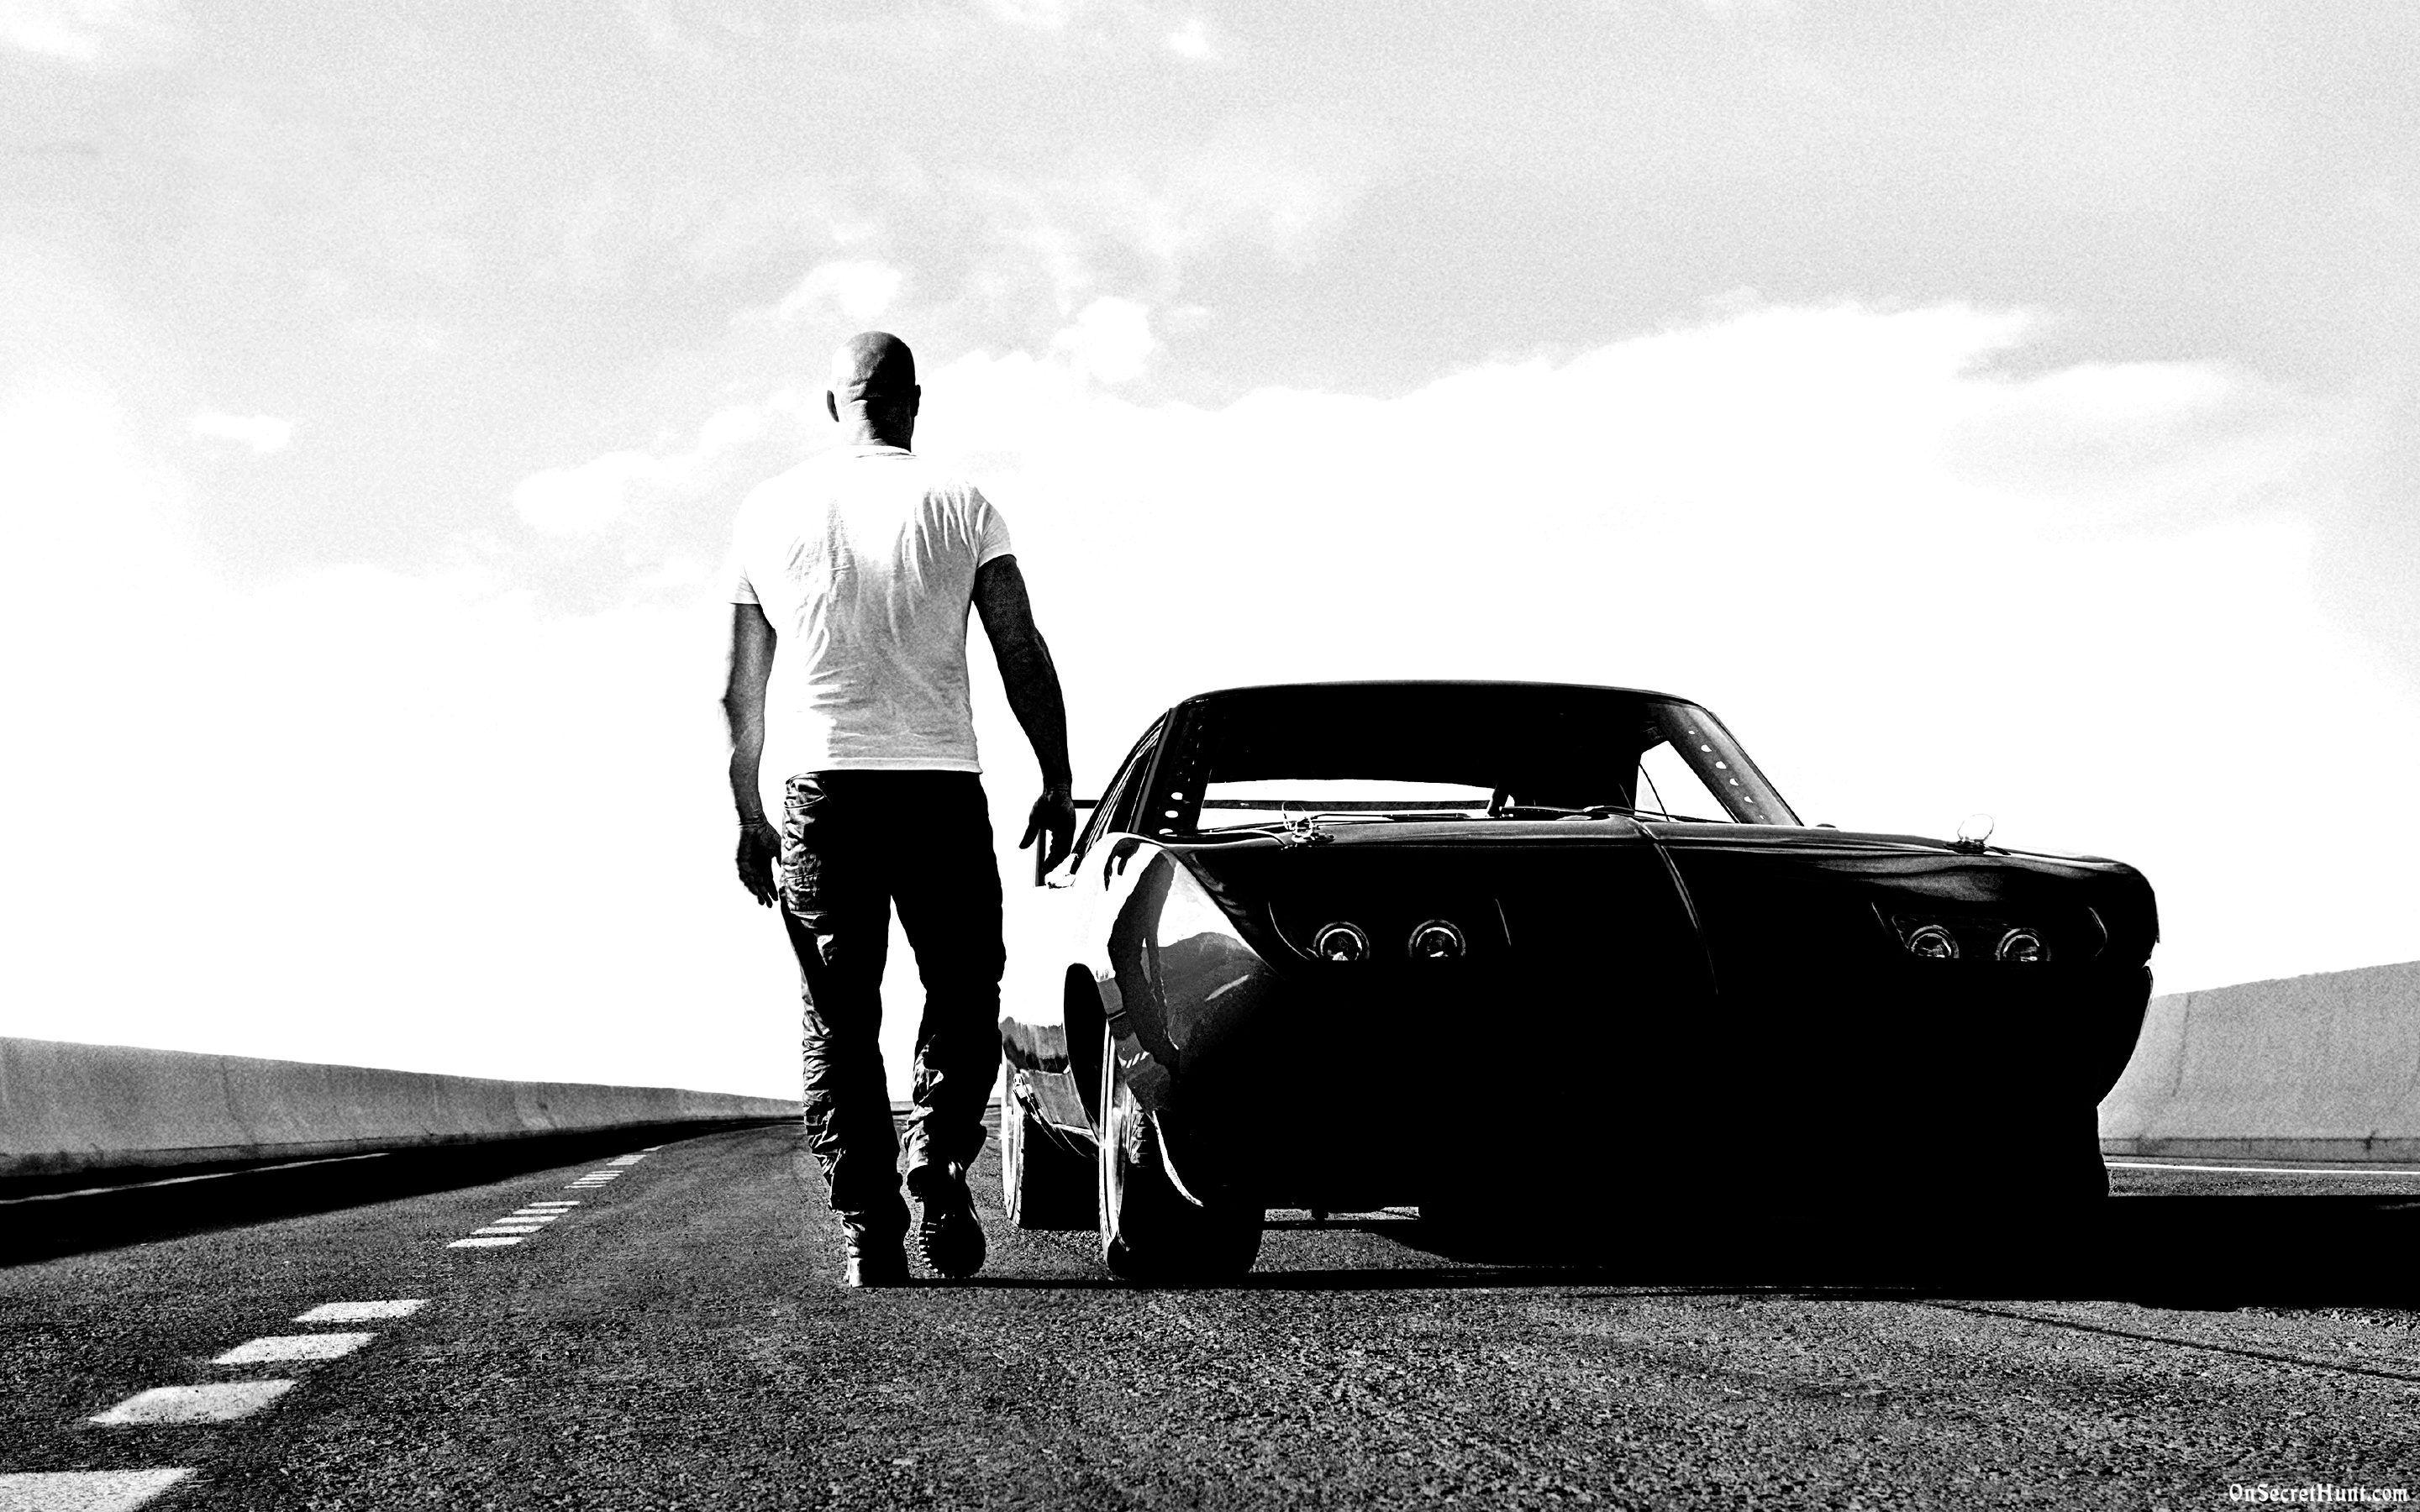 Wallpaper Wednesday Gets Fast And Furious